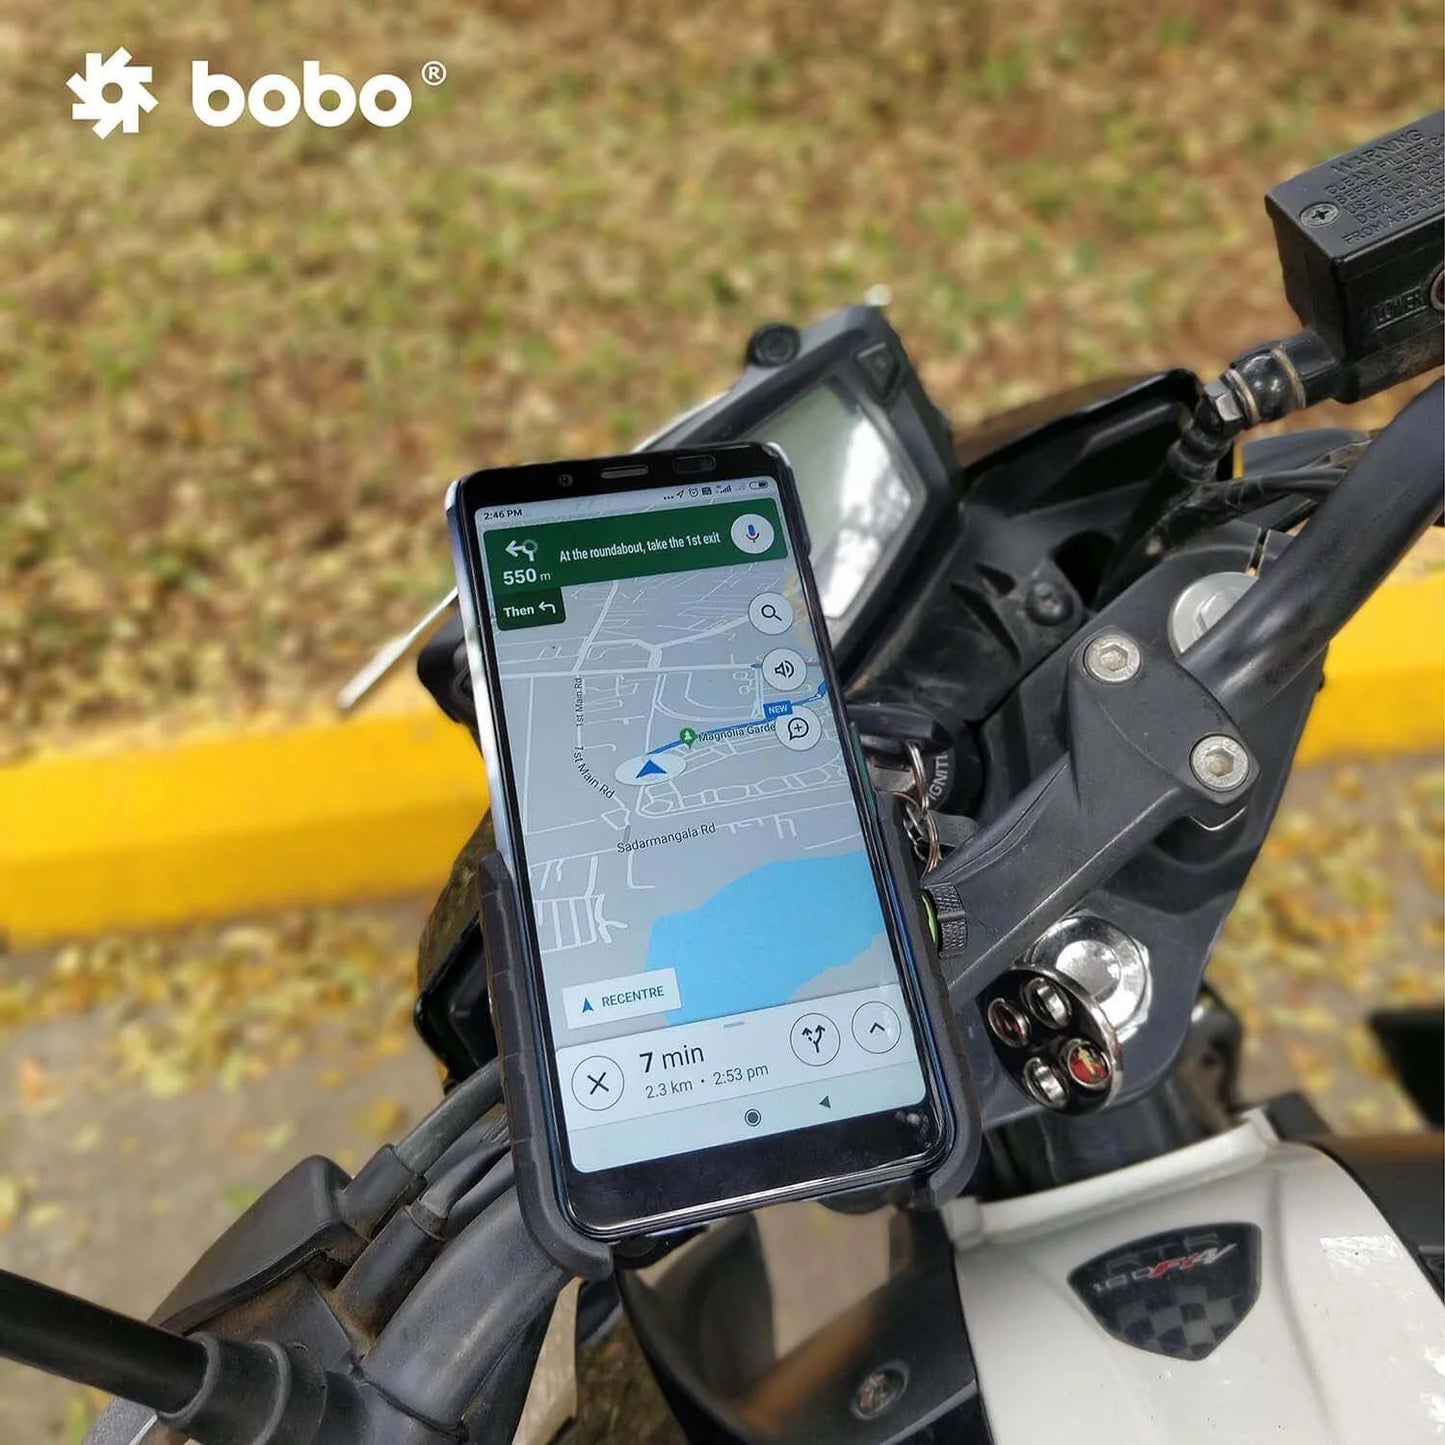 BOBO BM4 Jaw-Grip Waterproof Bike/Motorcycle/Scooter Mobile Phone Holder Mount, Ideal for Maps and GPS Navigation (Black)